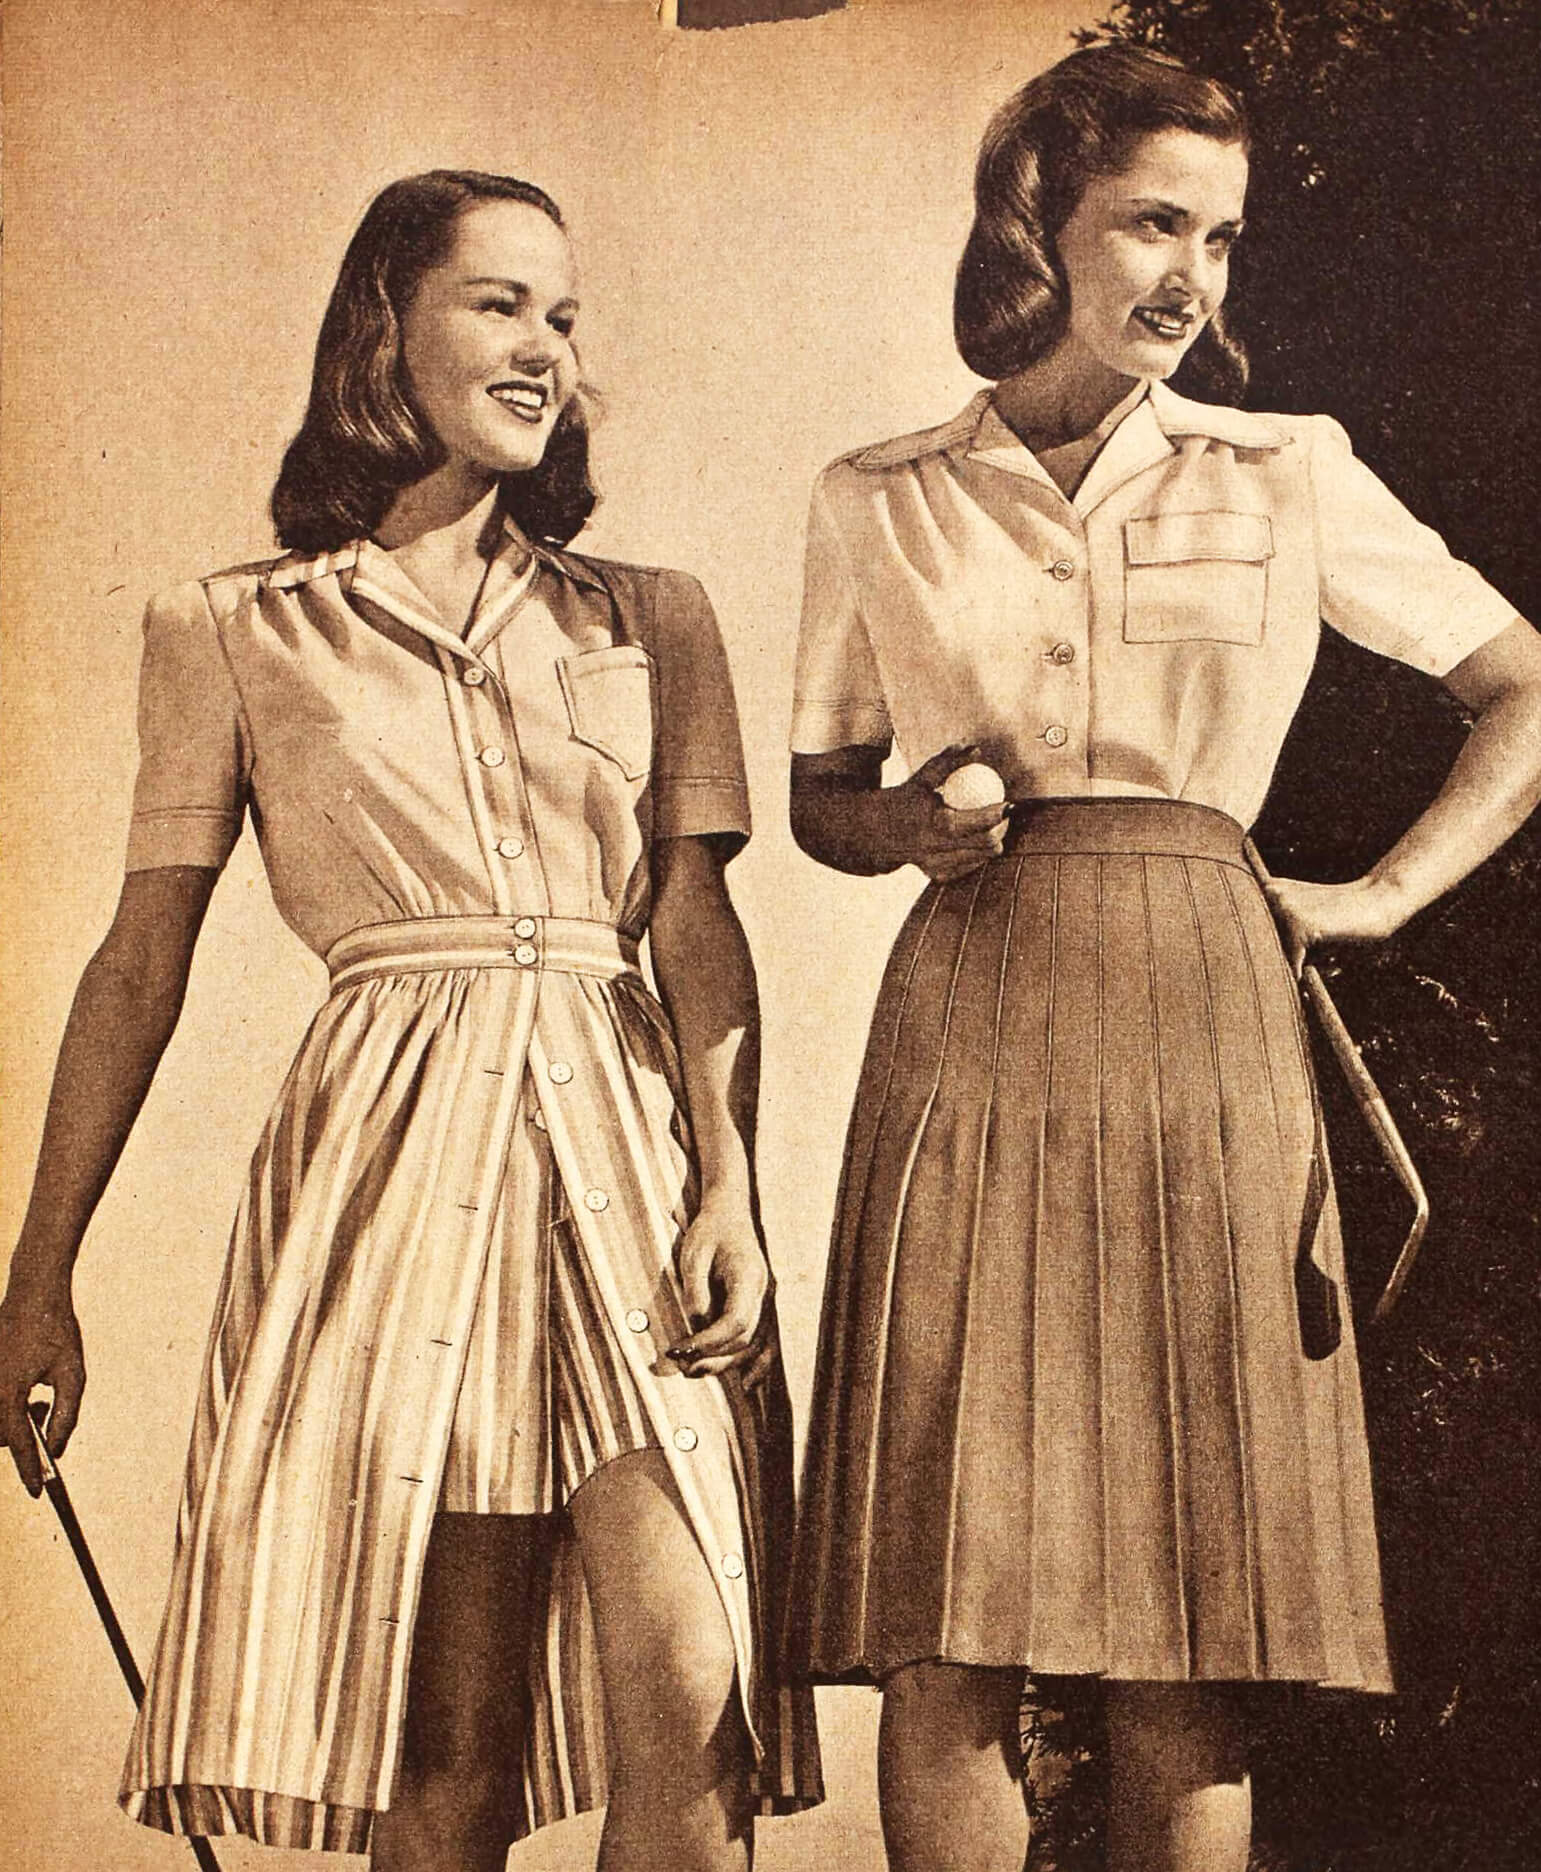 12 Outdoor sports clothes, Sears Roebuck Catalog, 1945 – The